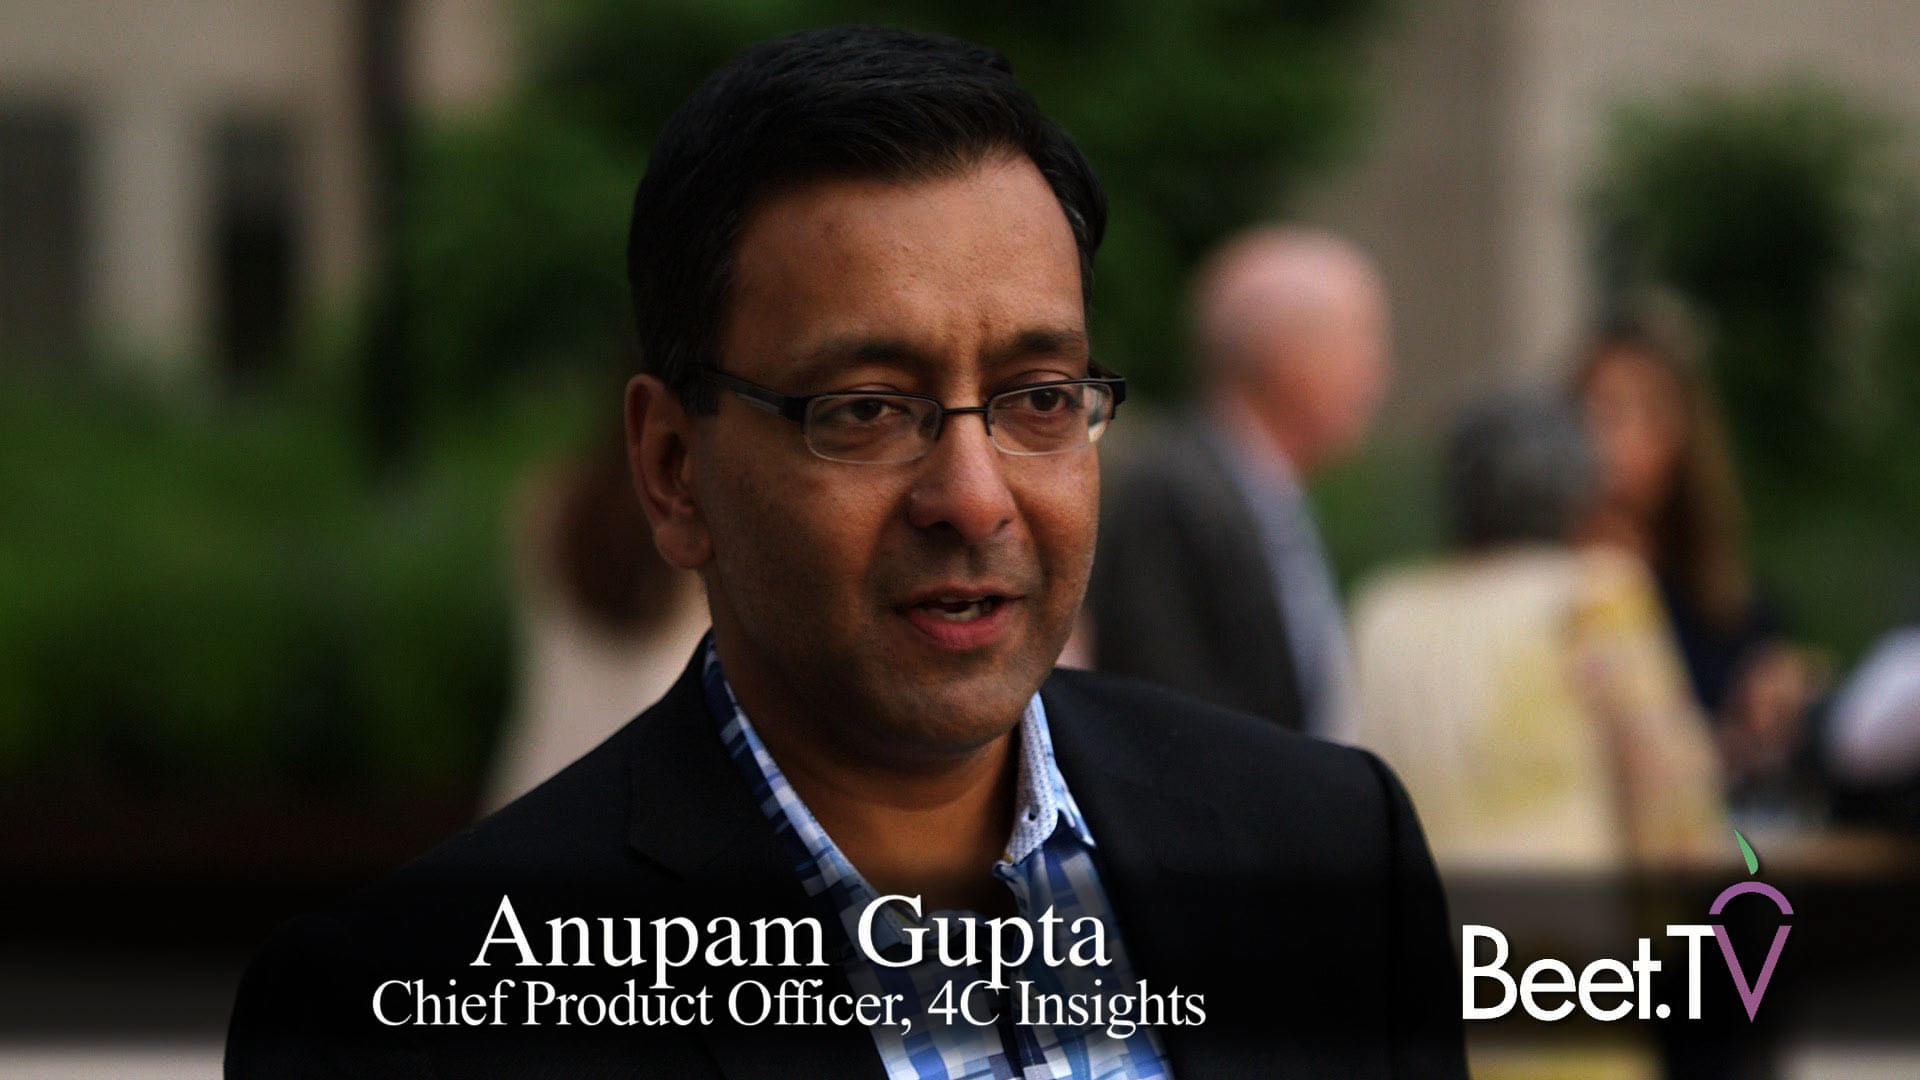 Data-Driven Targeting Promise Becomes Application: 4C Insights’ Gupta